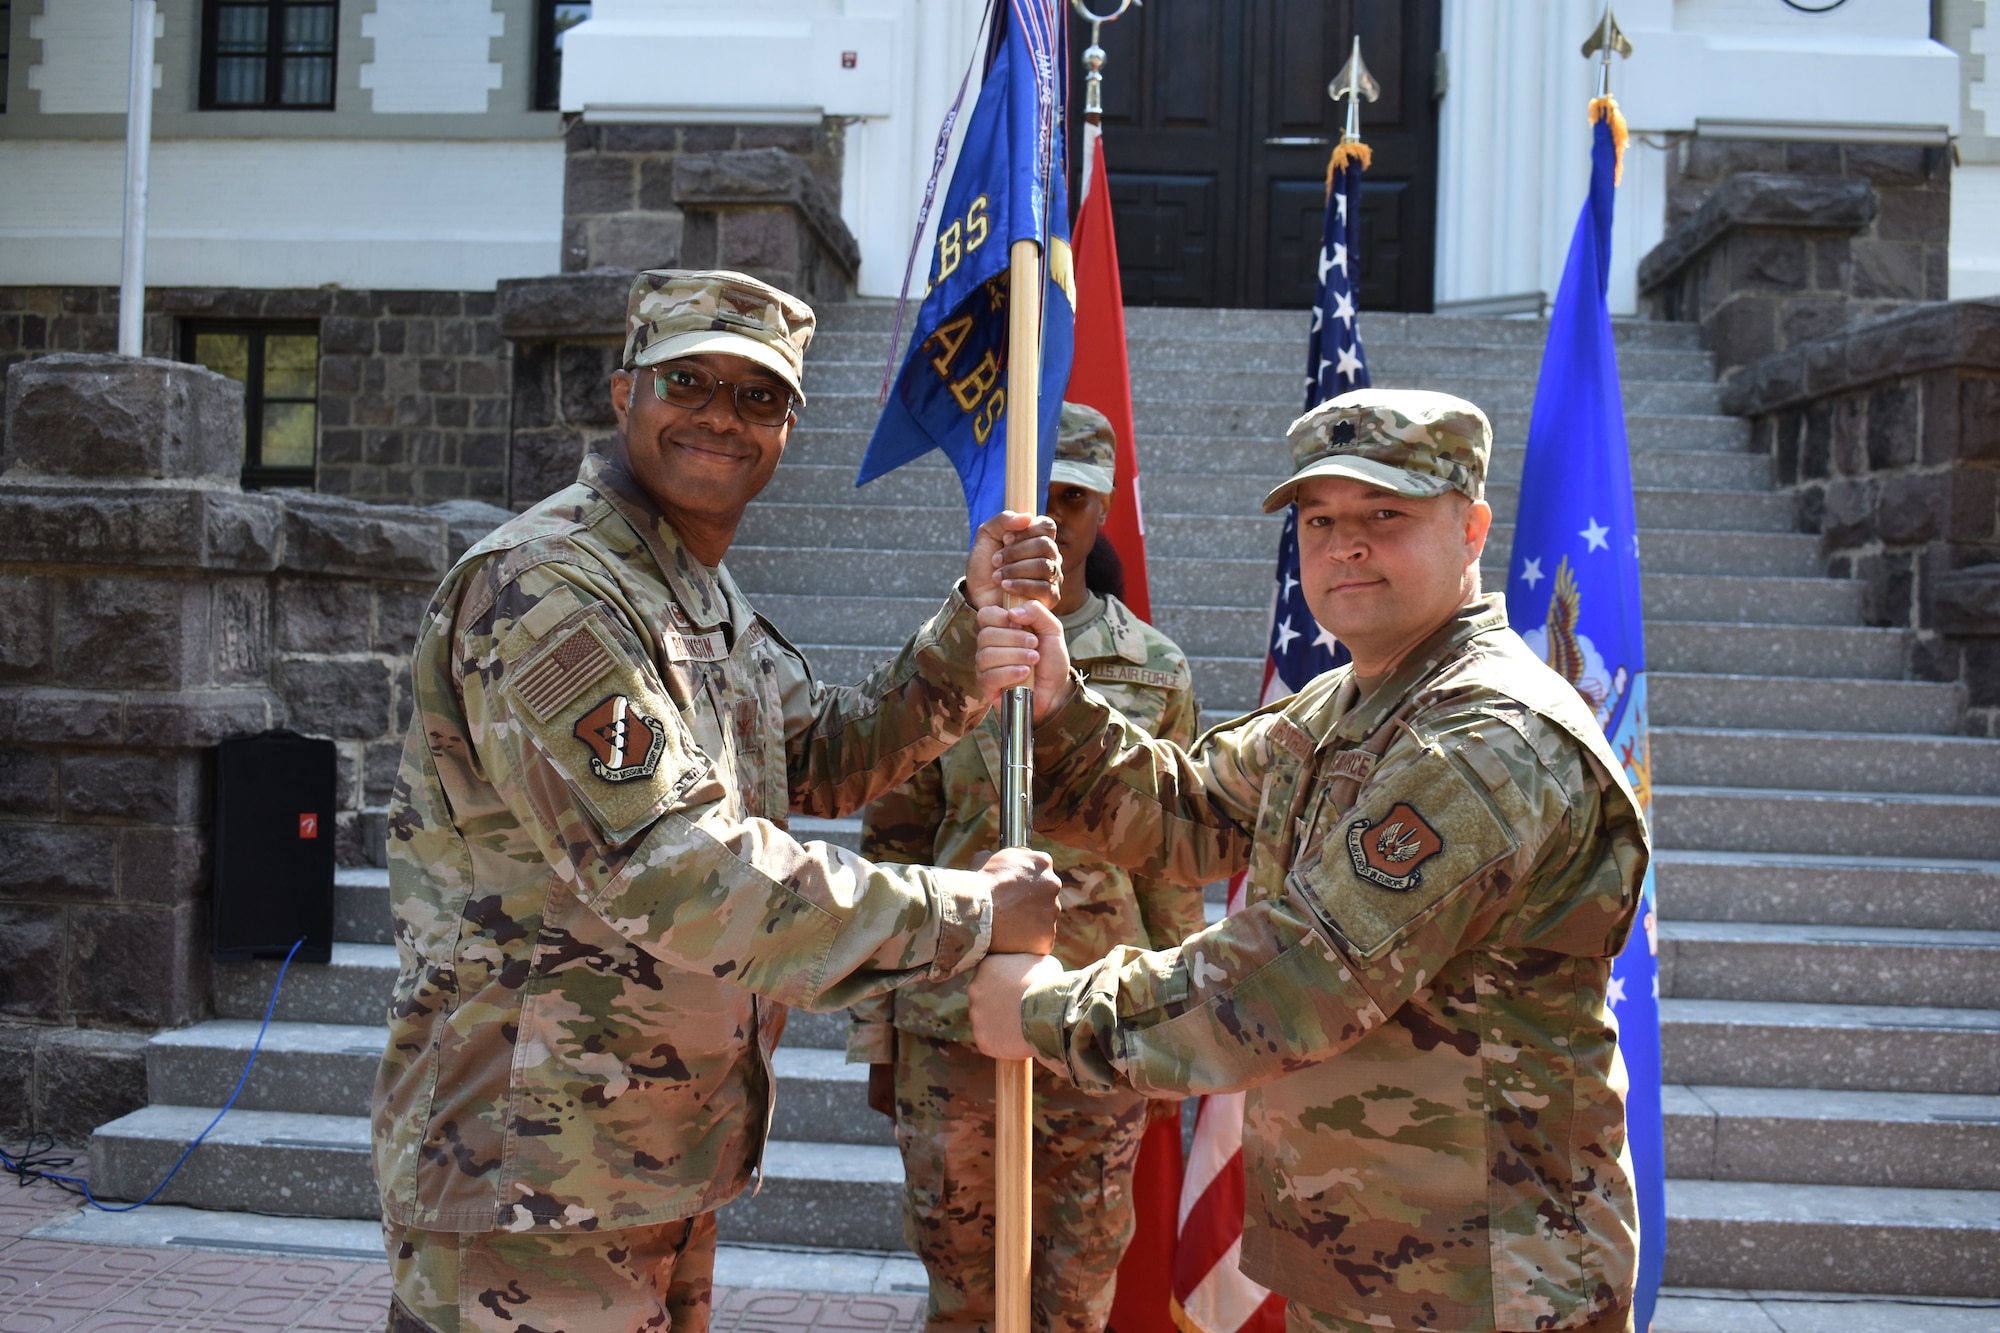 Col. Christopher Robinson, 39th Mission Support Group commander (left) accepts the guidon from Lt. Col. Todd Rotramel, outgoing 425th Air Base Squadron commander, as he relinquishes command of the 425th ABS during a change of command ceremony Aug. 15, 2022, at Izmir, Türkiye. Robinson officiated the ceremony. (U.S. Air Force photo by Tanju Varlıklı)